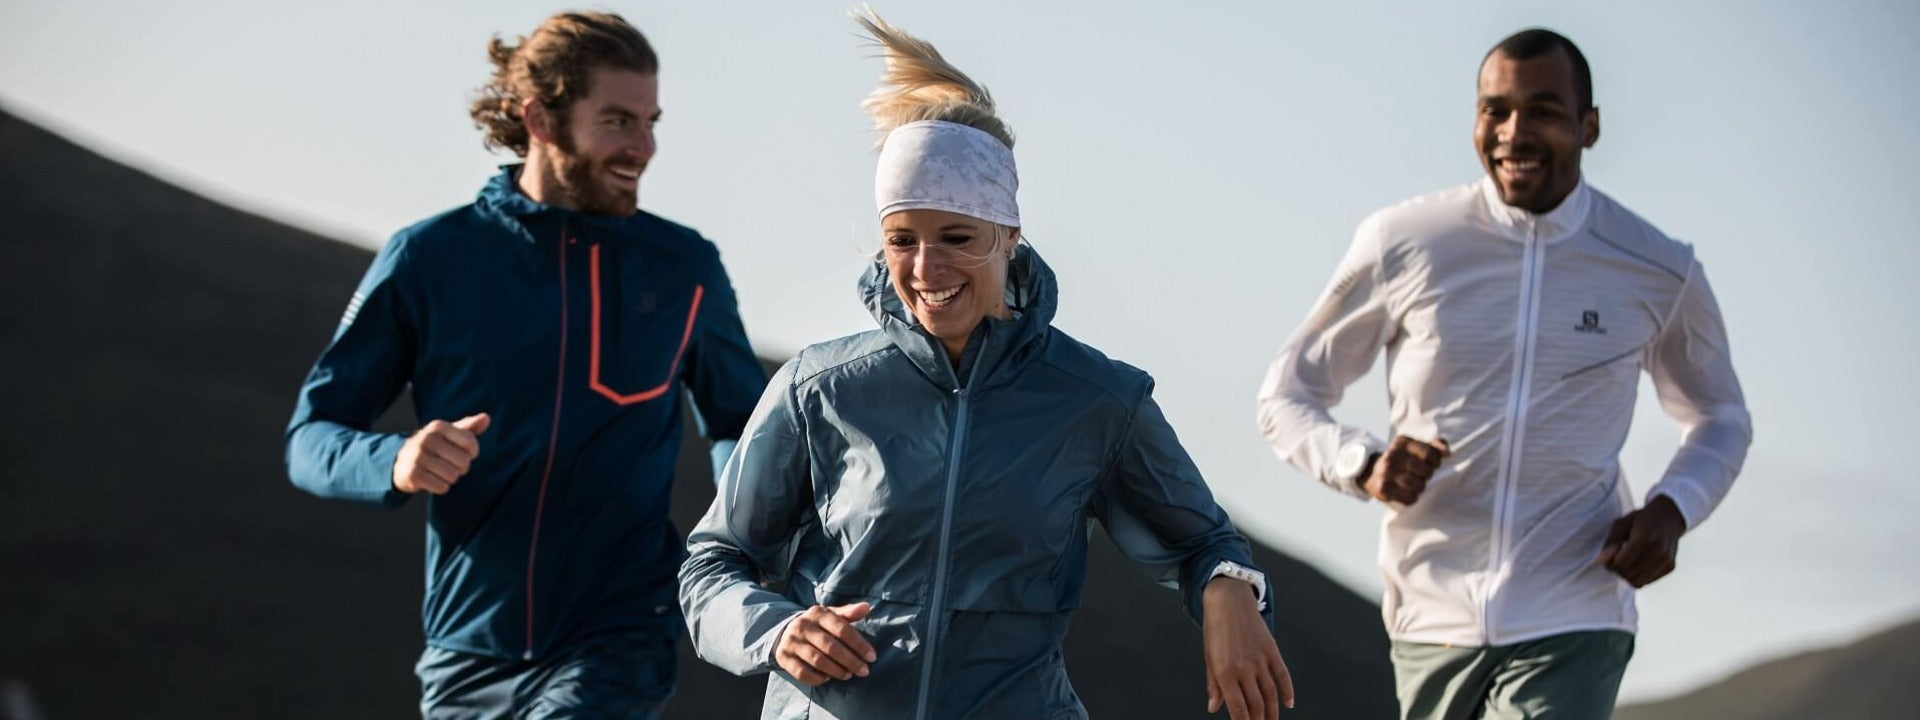 HOW TO CHOOSE A RUNNING JACKET